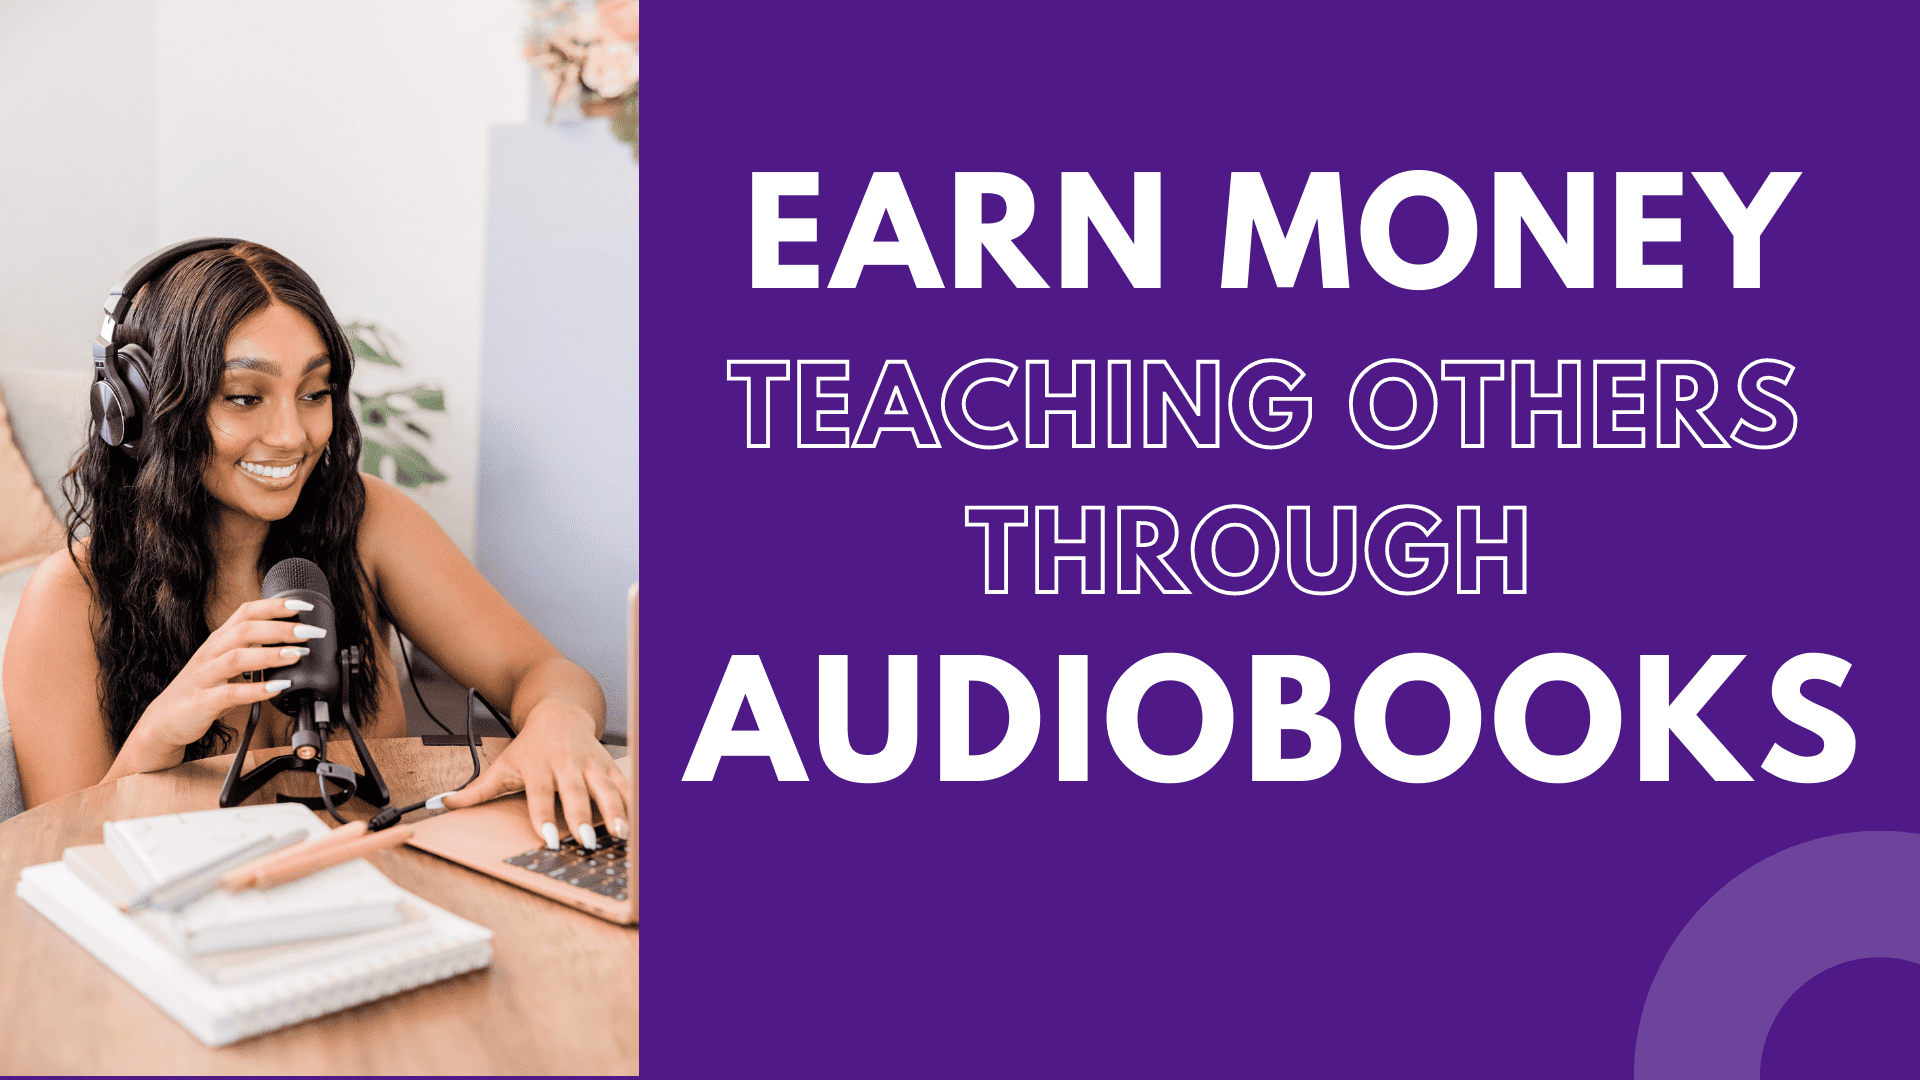 Discover a new way to share your knowledge and expertise with the Salesforce community while earning some income. Learn how you can create and record your own audiobooks today!